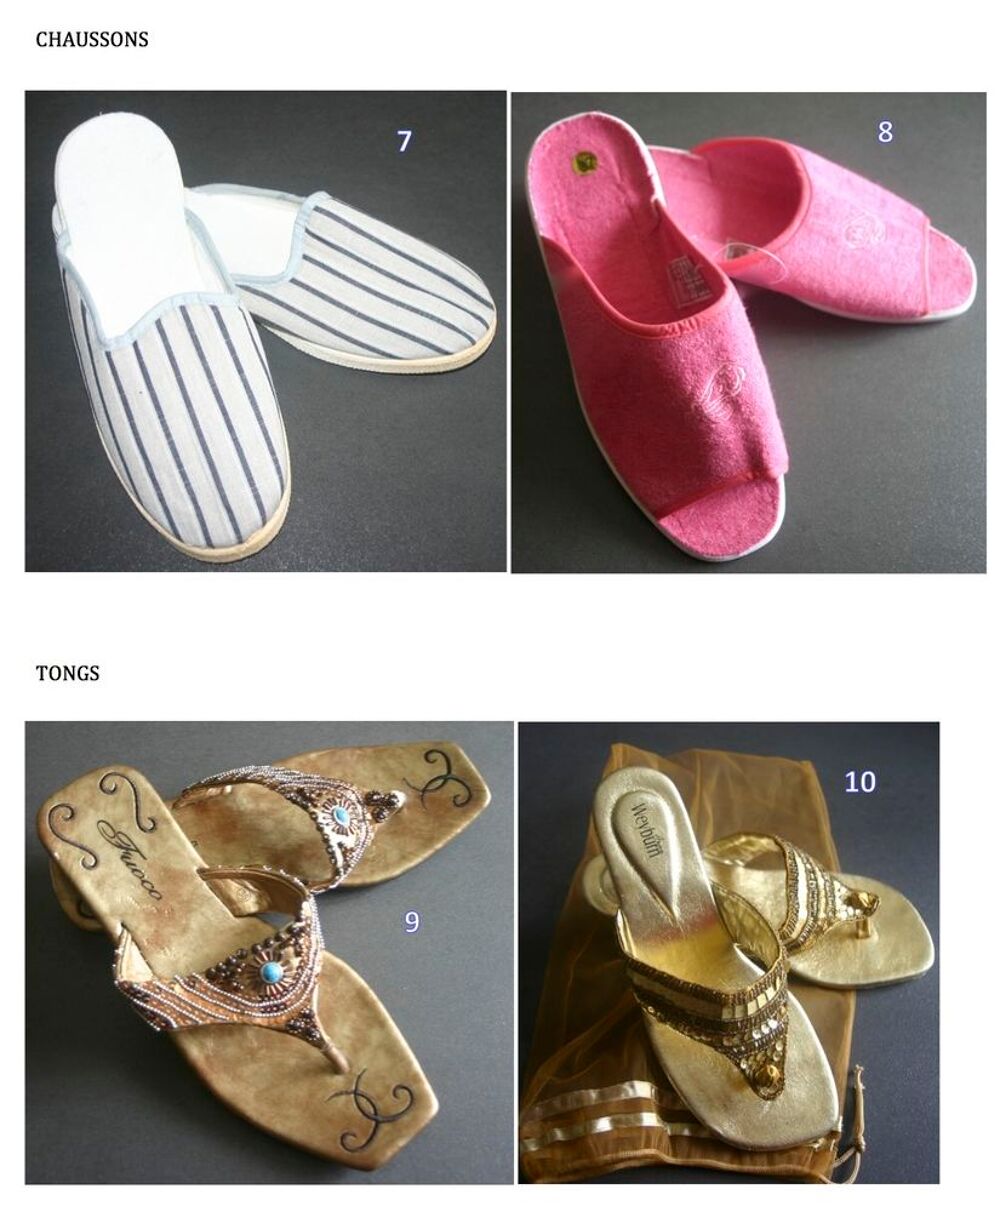 CHAUSSONS, CHAUSSURES ET TONGS DIVERSES TAILLES Chaussures